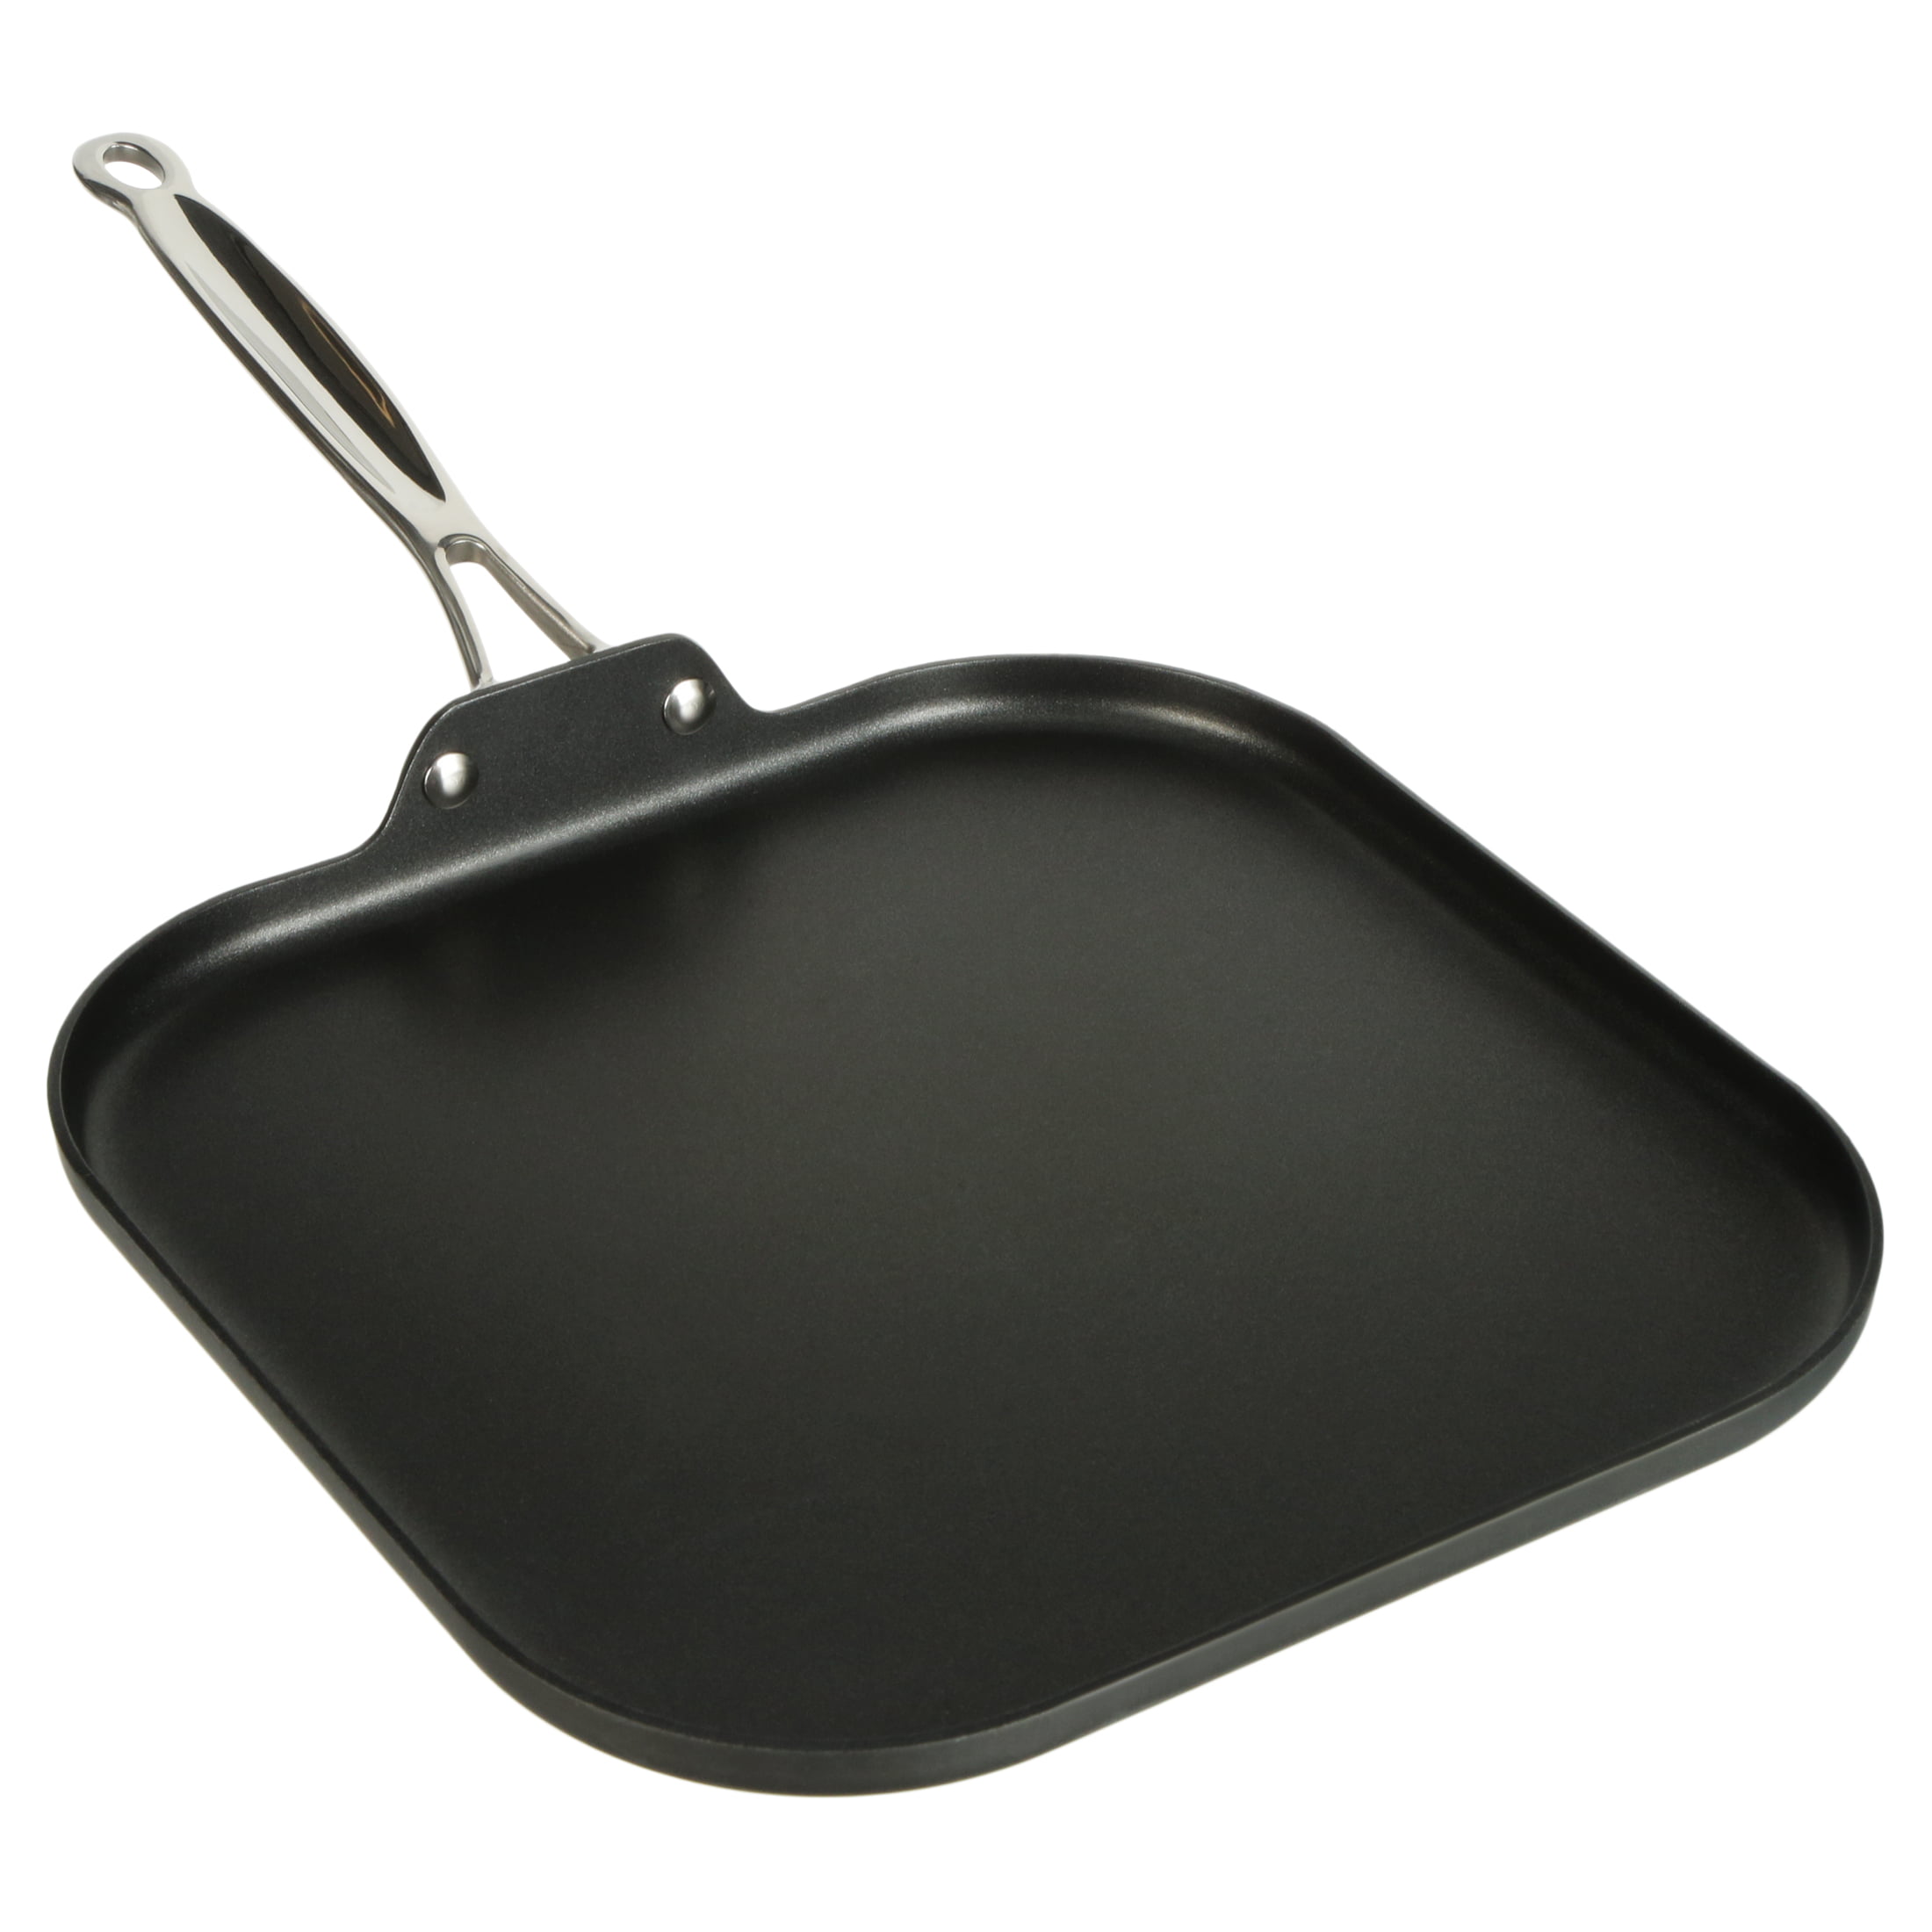 Cuisinart 630-20 Chef's Classic 11-Inch Square Griddle  Nonstick-Hard-Anodized & 10-Inch Crepe Pan, Chef's Classic Nonstick Hard  Anodized, Black